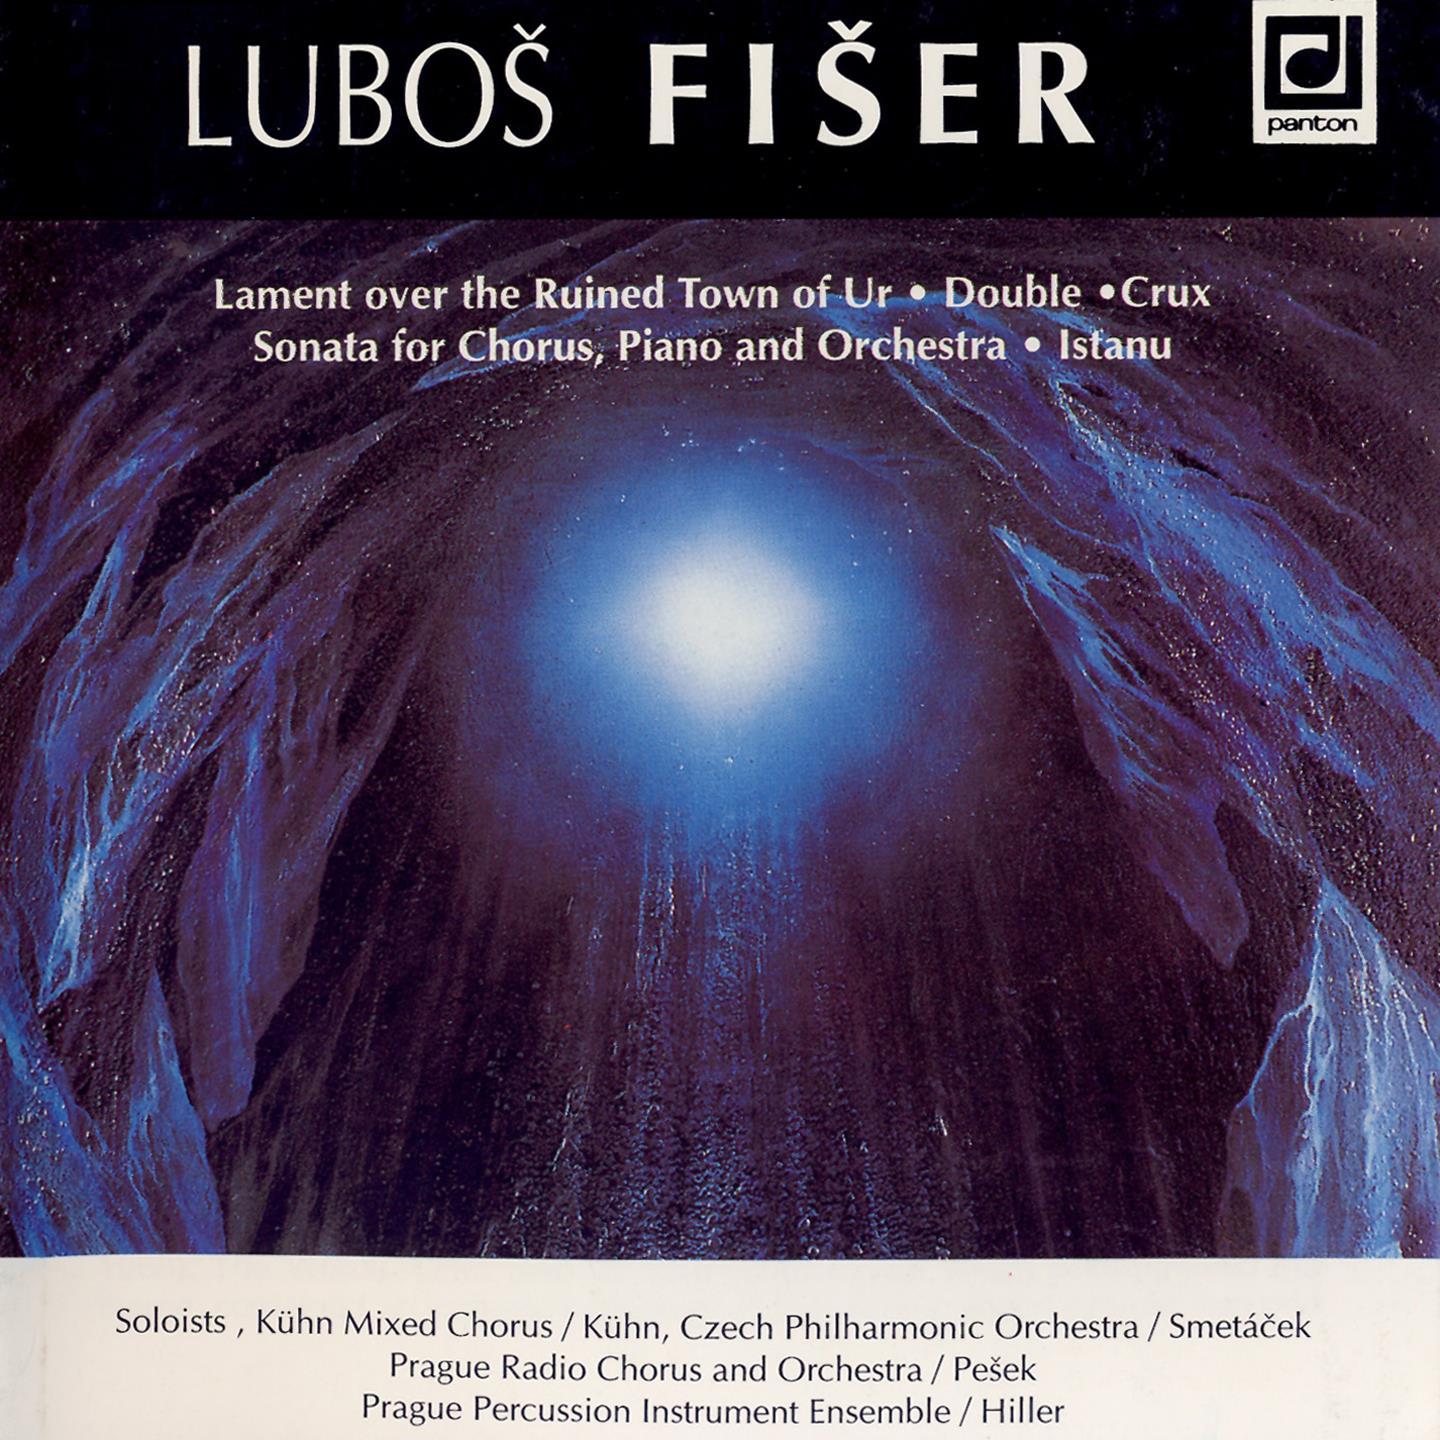 Fi er: Lament over the Ruined Town of Ur, Double, Crux, Sonata, Istanu